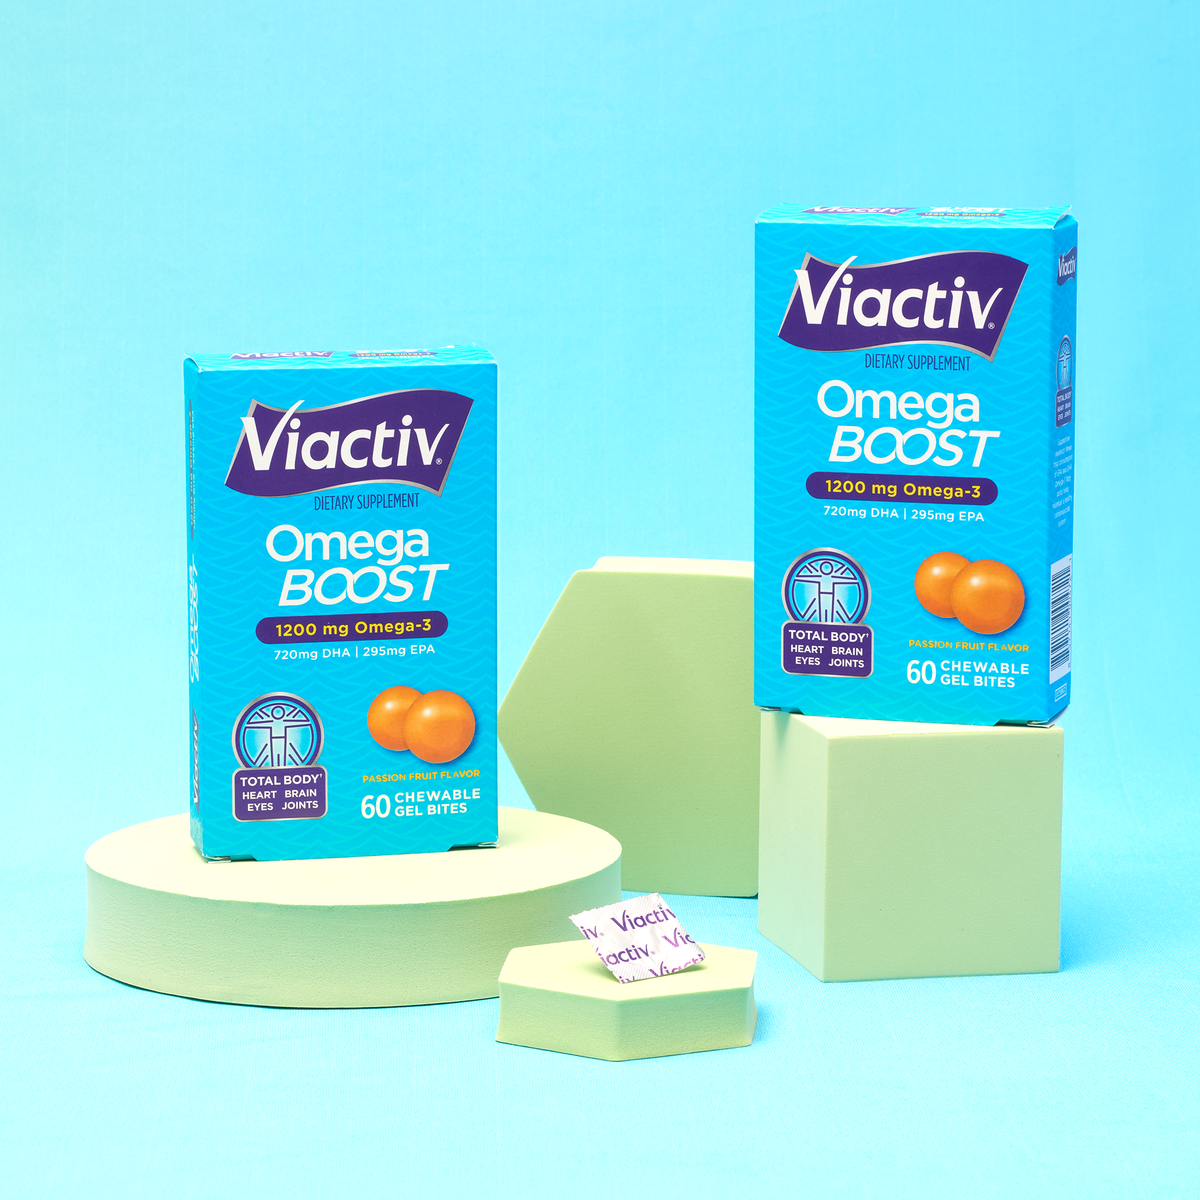 2 boxes of Viactiv Omega Boost with one pod in the center